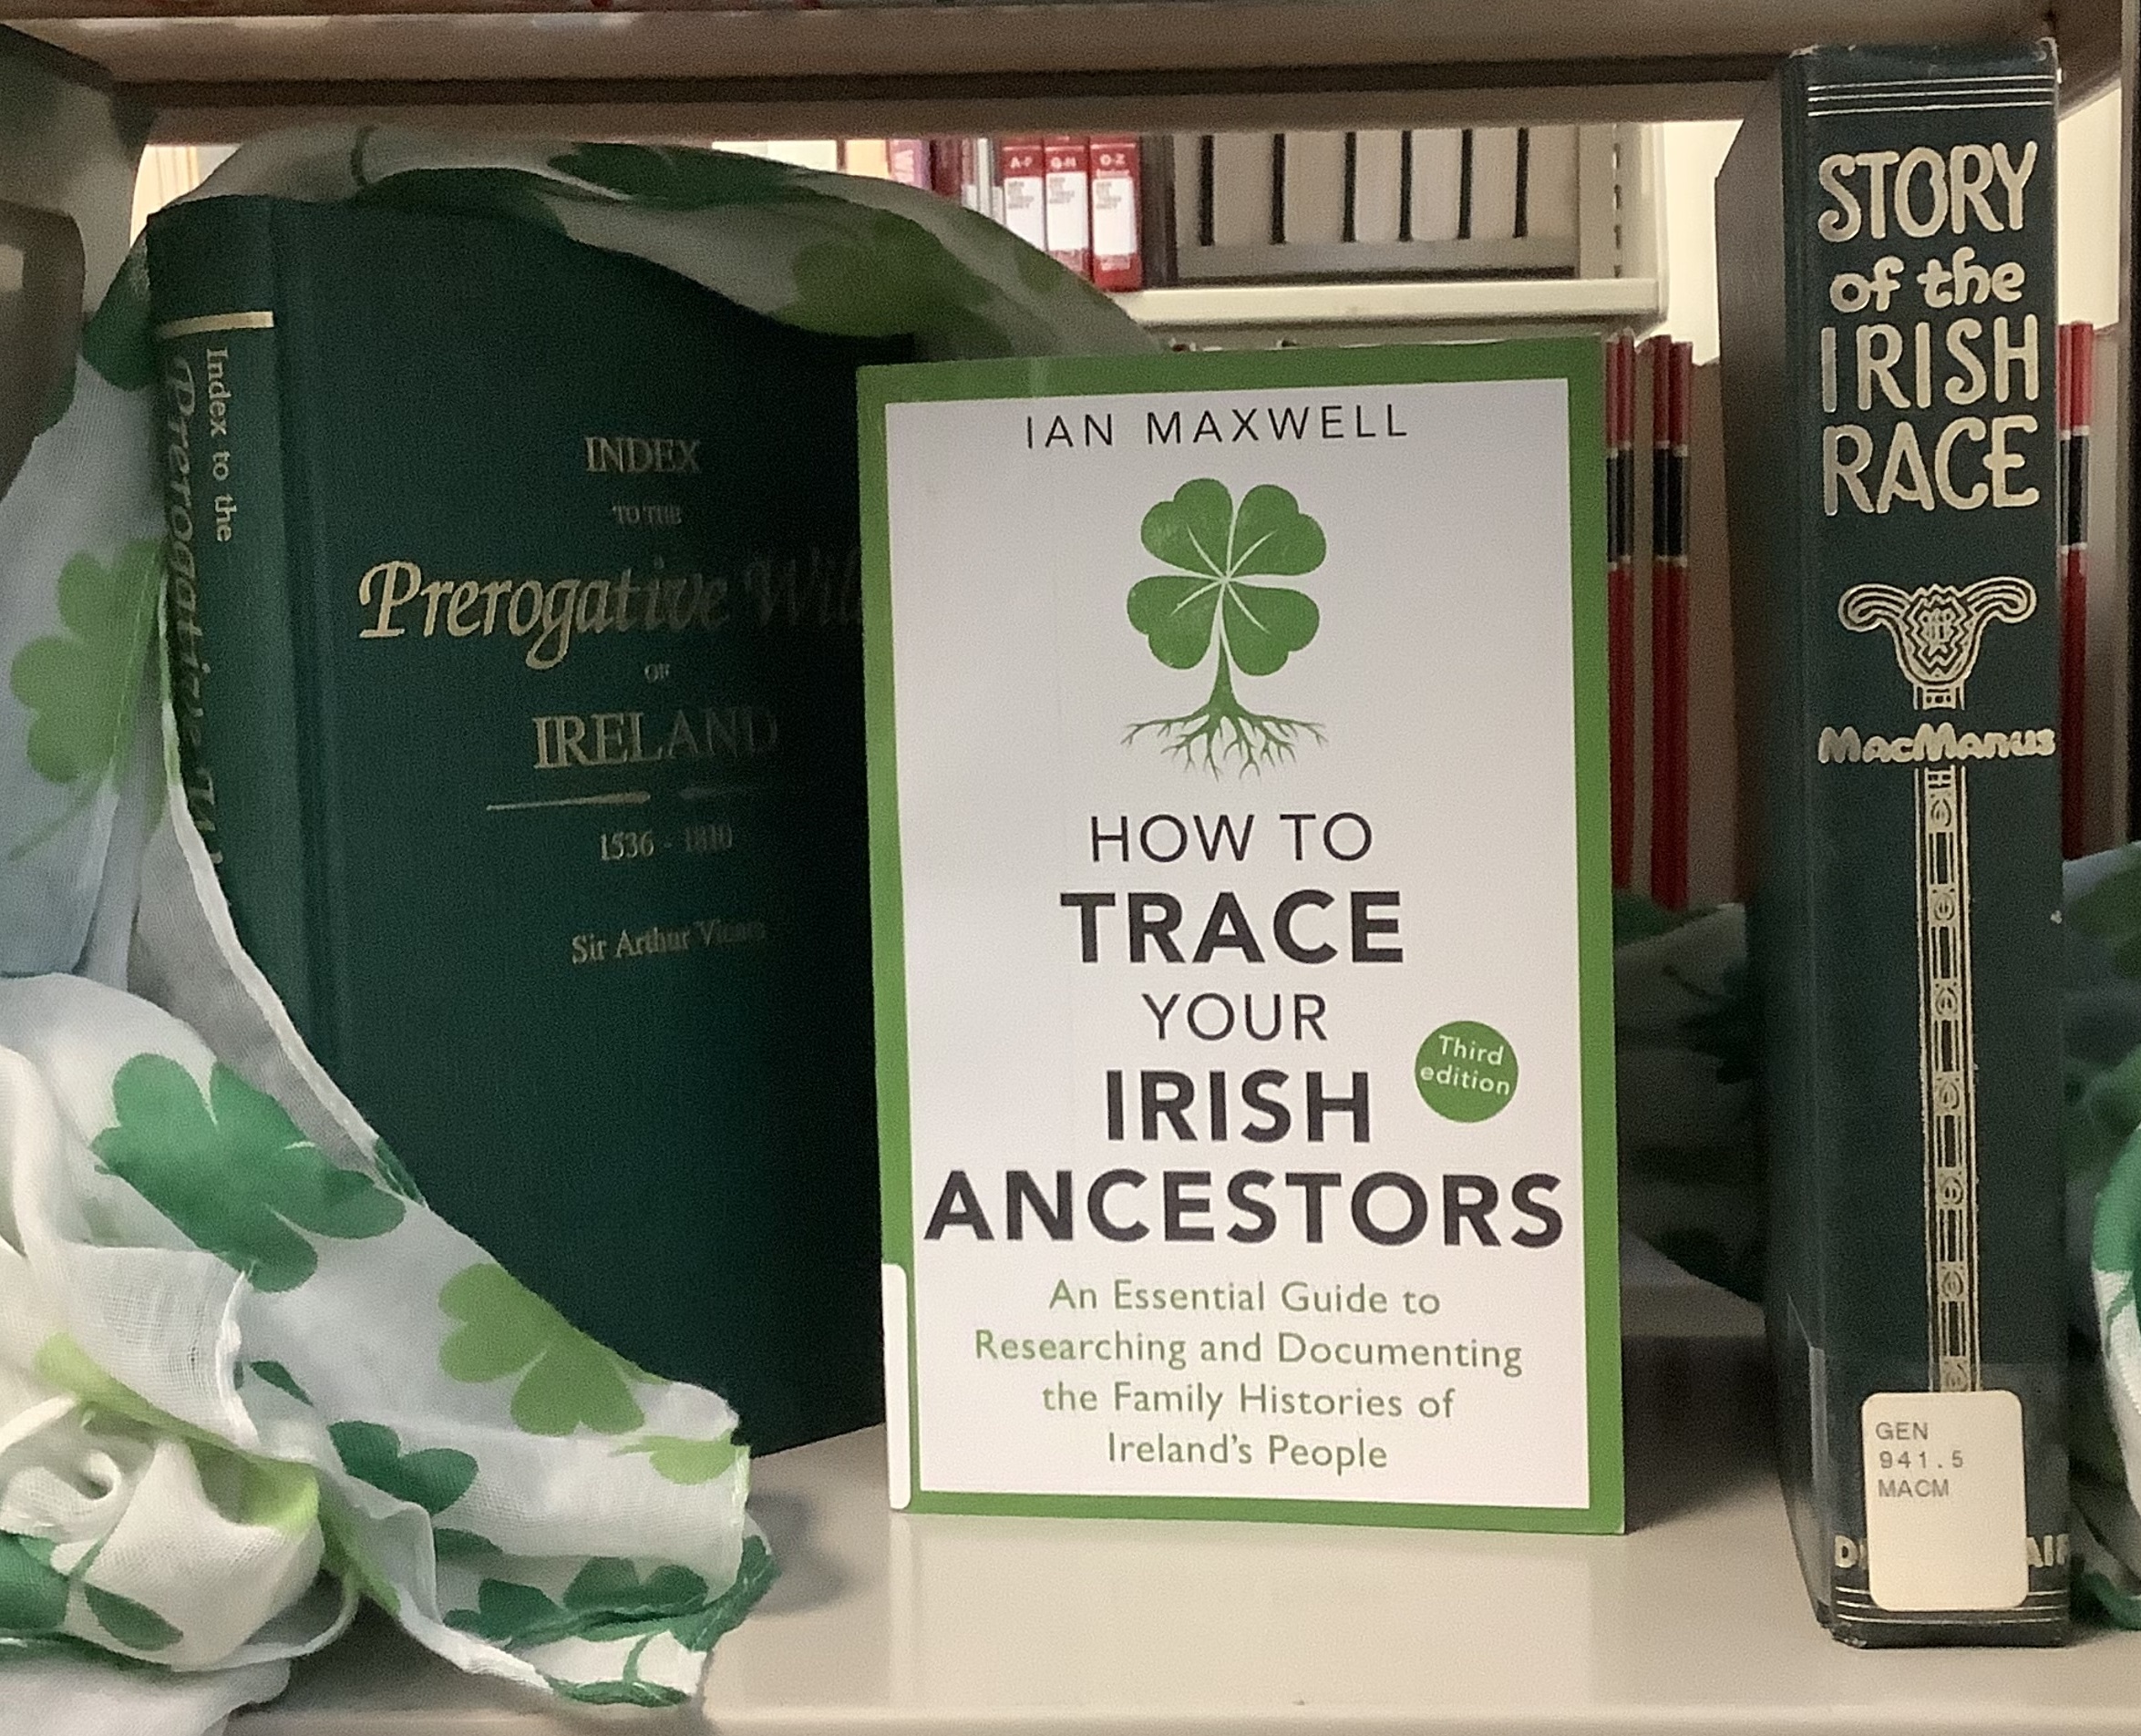 Book Index to the Prerogative of Ireland, How to Trace your Irish Ancestors, and Story of the Irish Race draped with a four leaf clover scarf